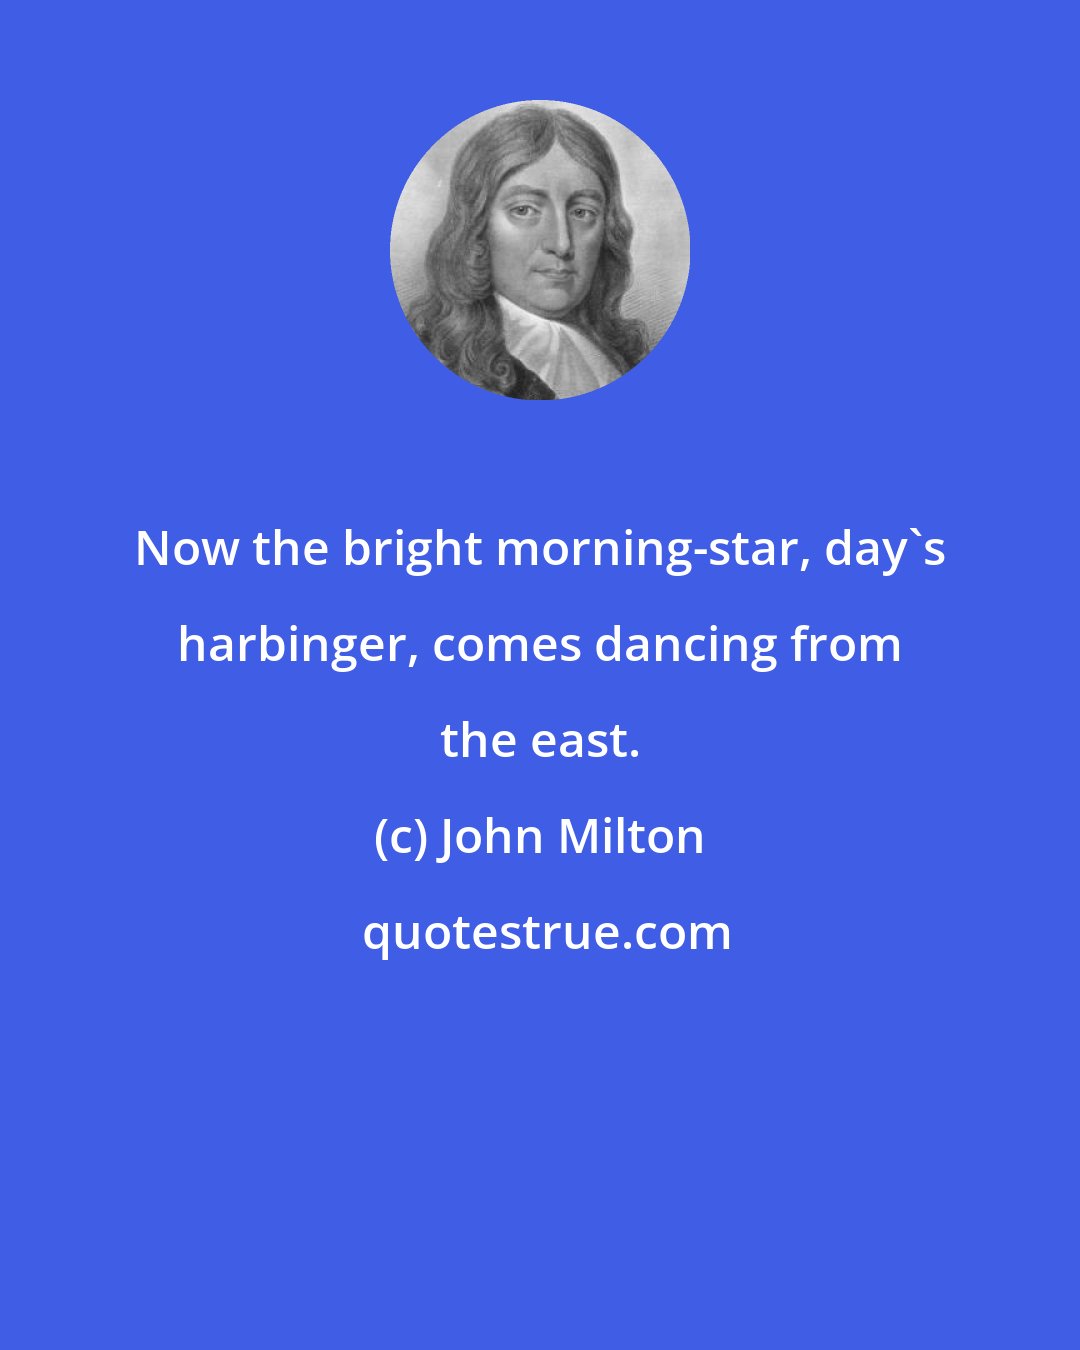 John Milton: Now the bright morning-star, day's harbinger, comes dancing from the east.